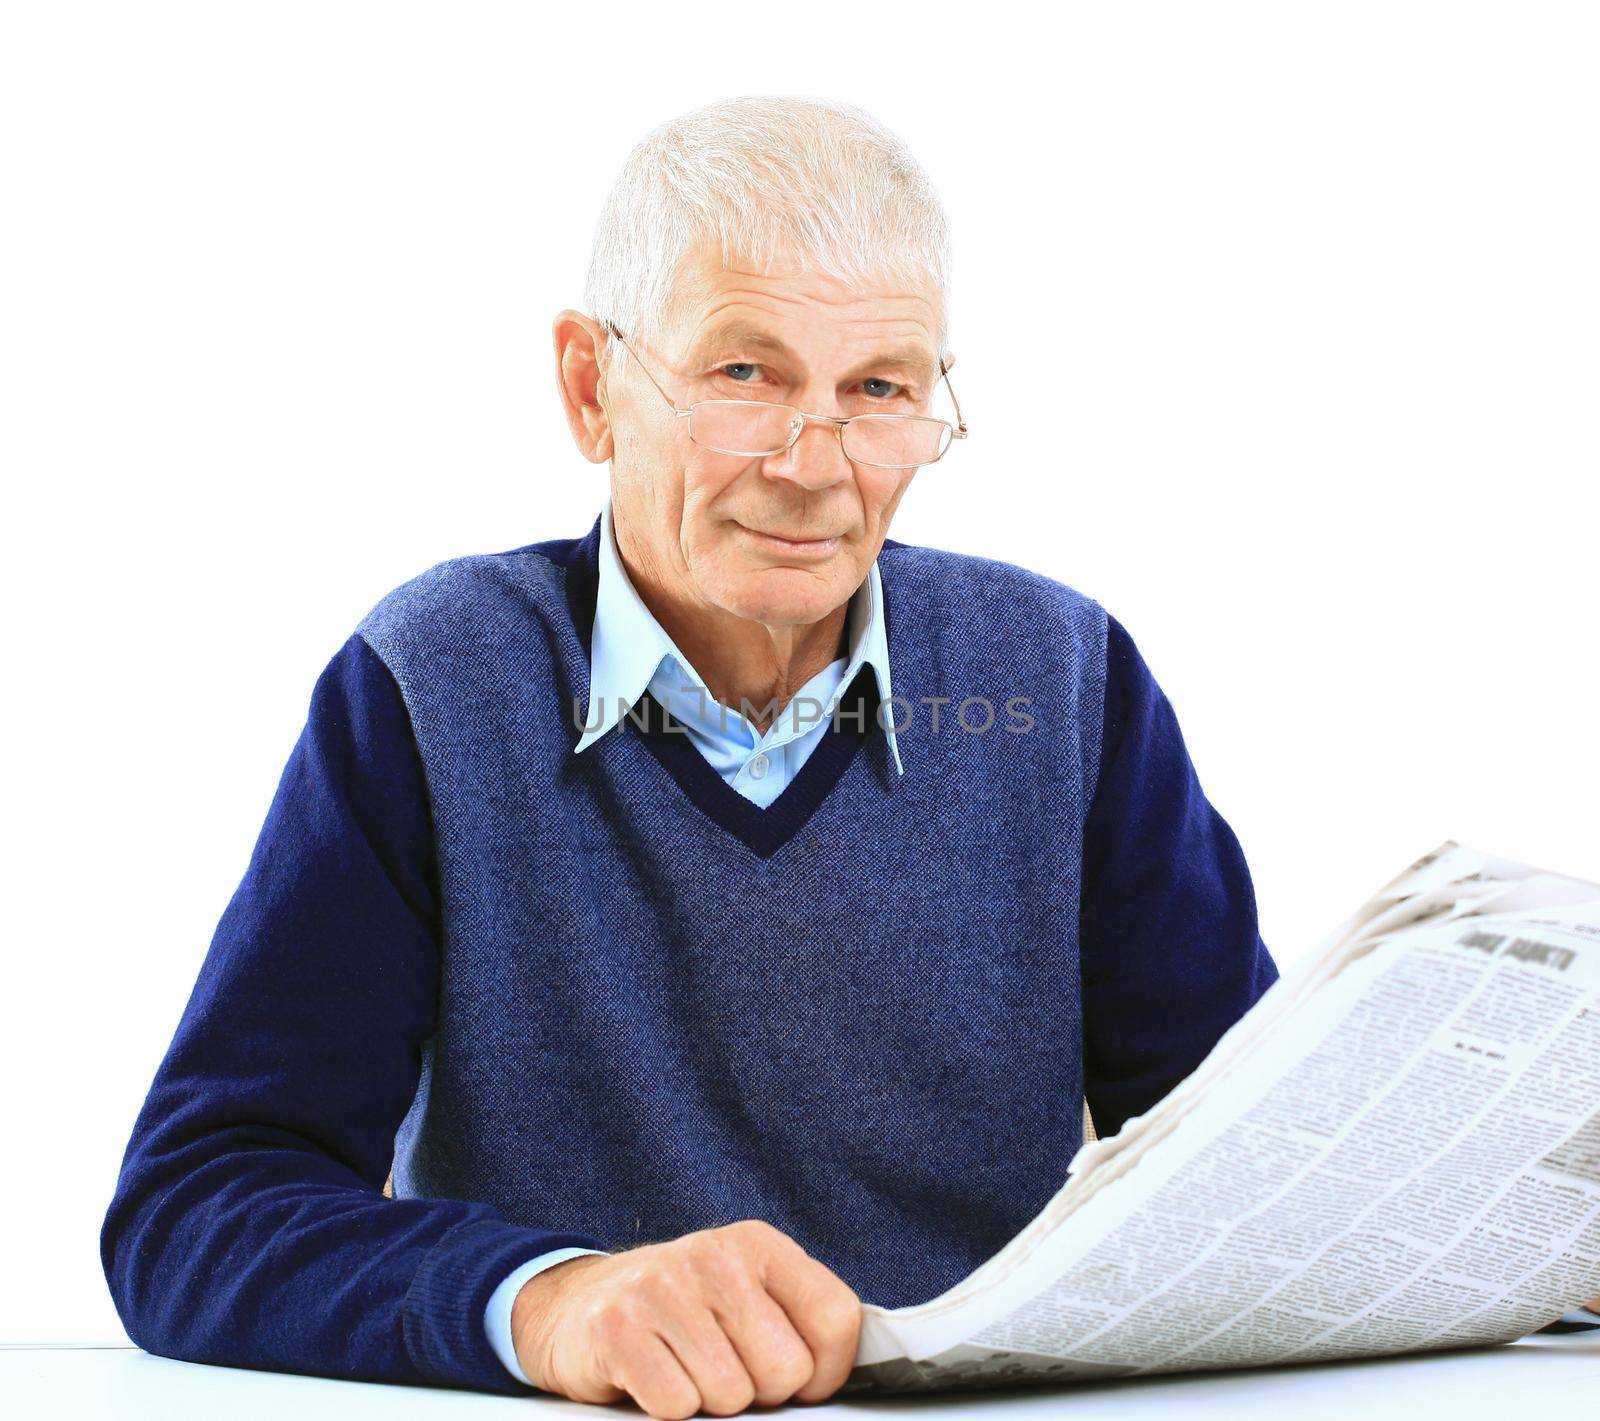 Portrait of an old man solving crosswords in the newspaper by tsyhun